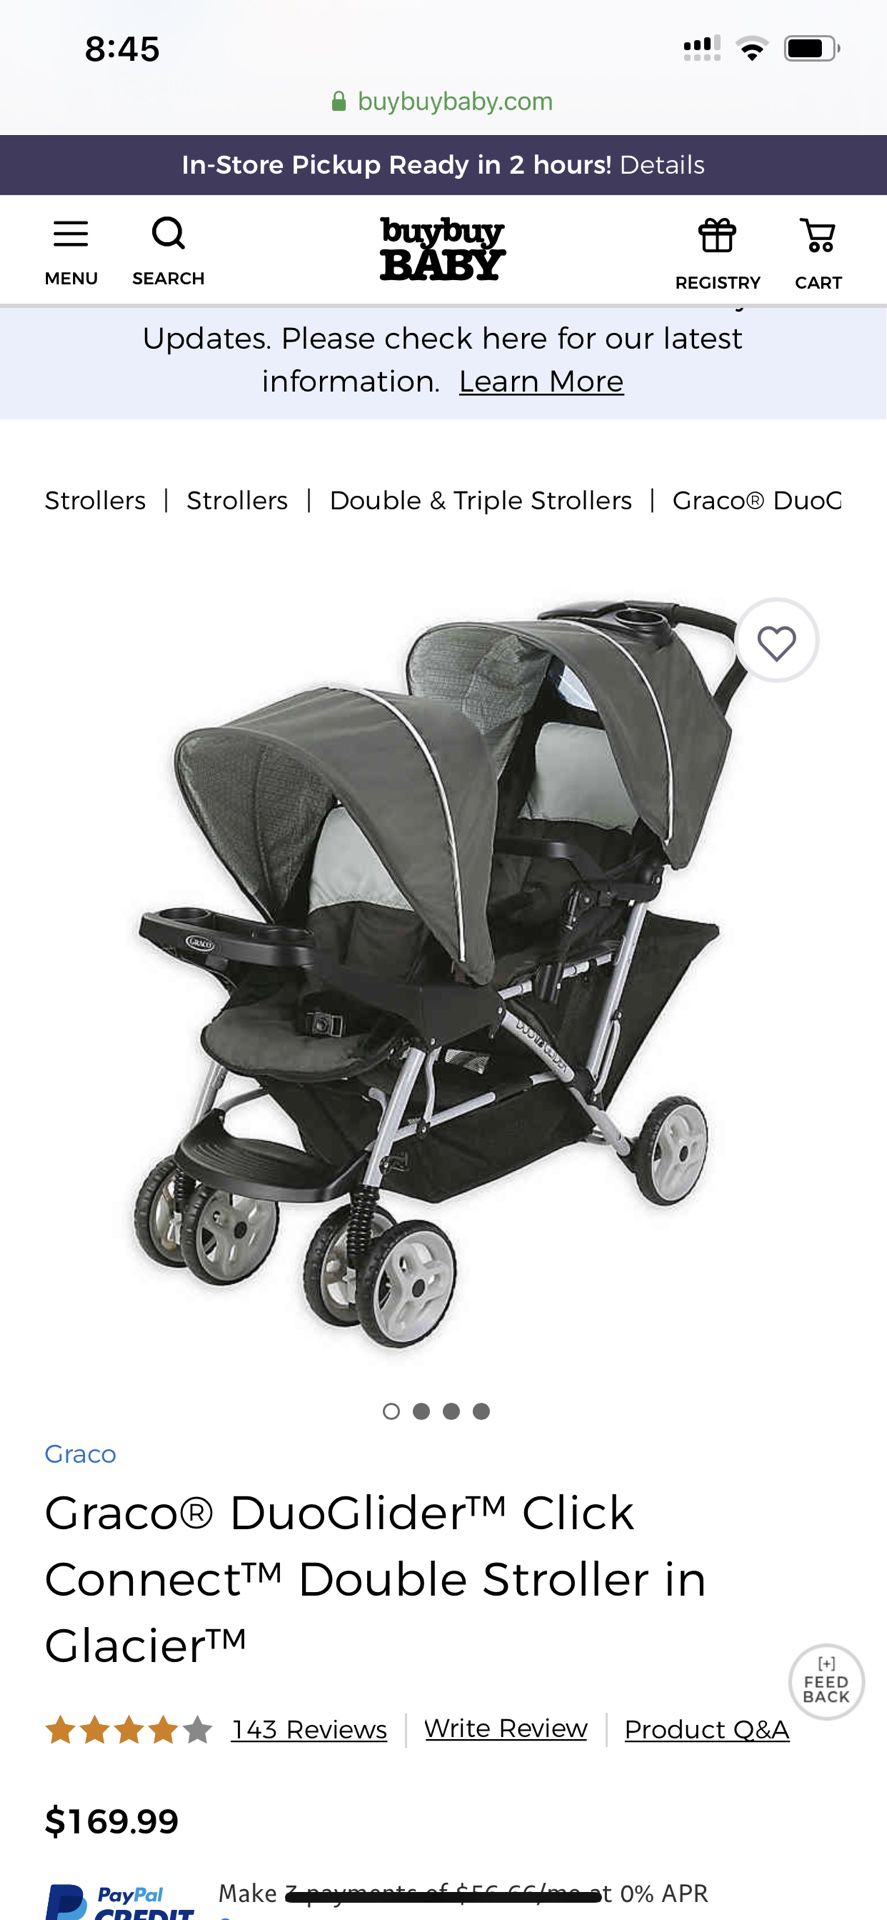 Graco DuoGlider Double Stroller | Lightweight Double Stroller with Tandem Seating NEW IN BOX